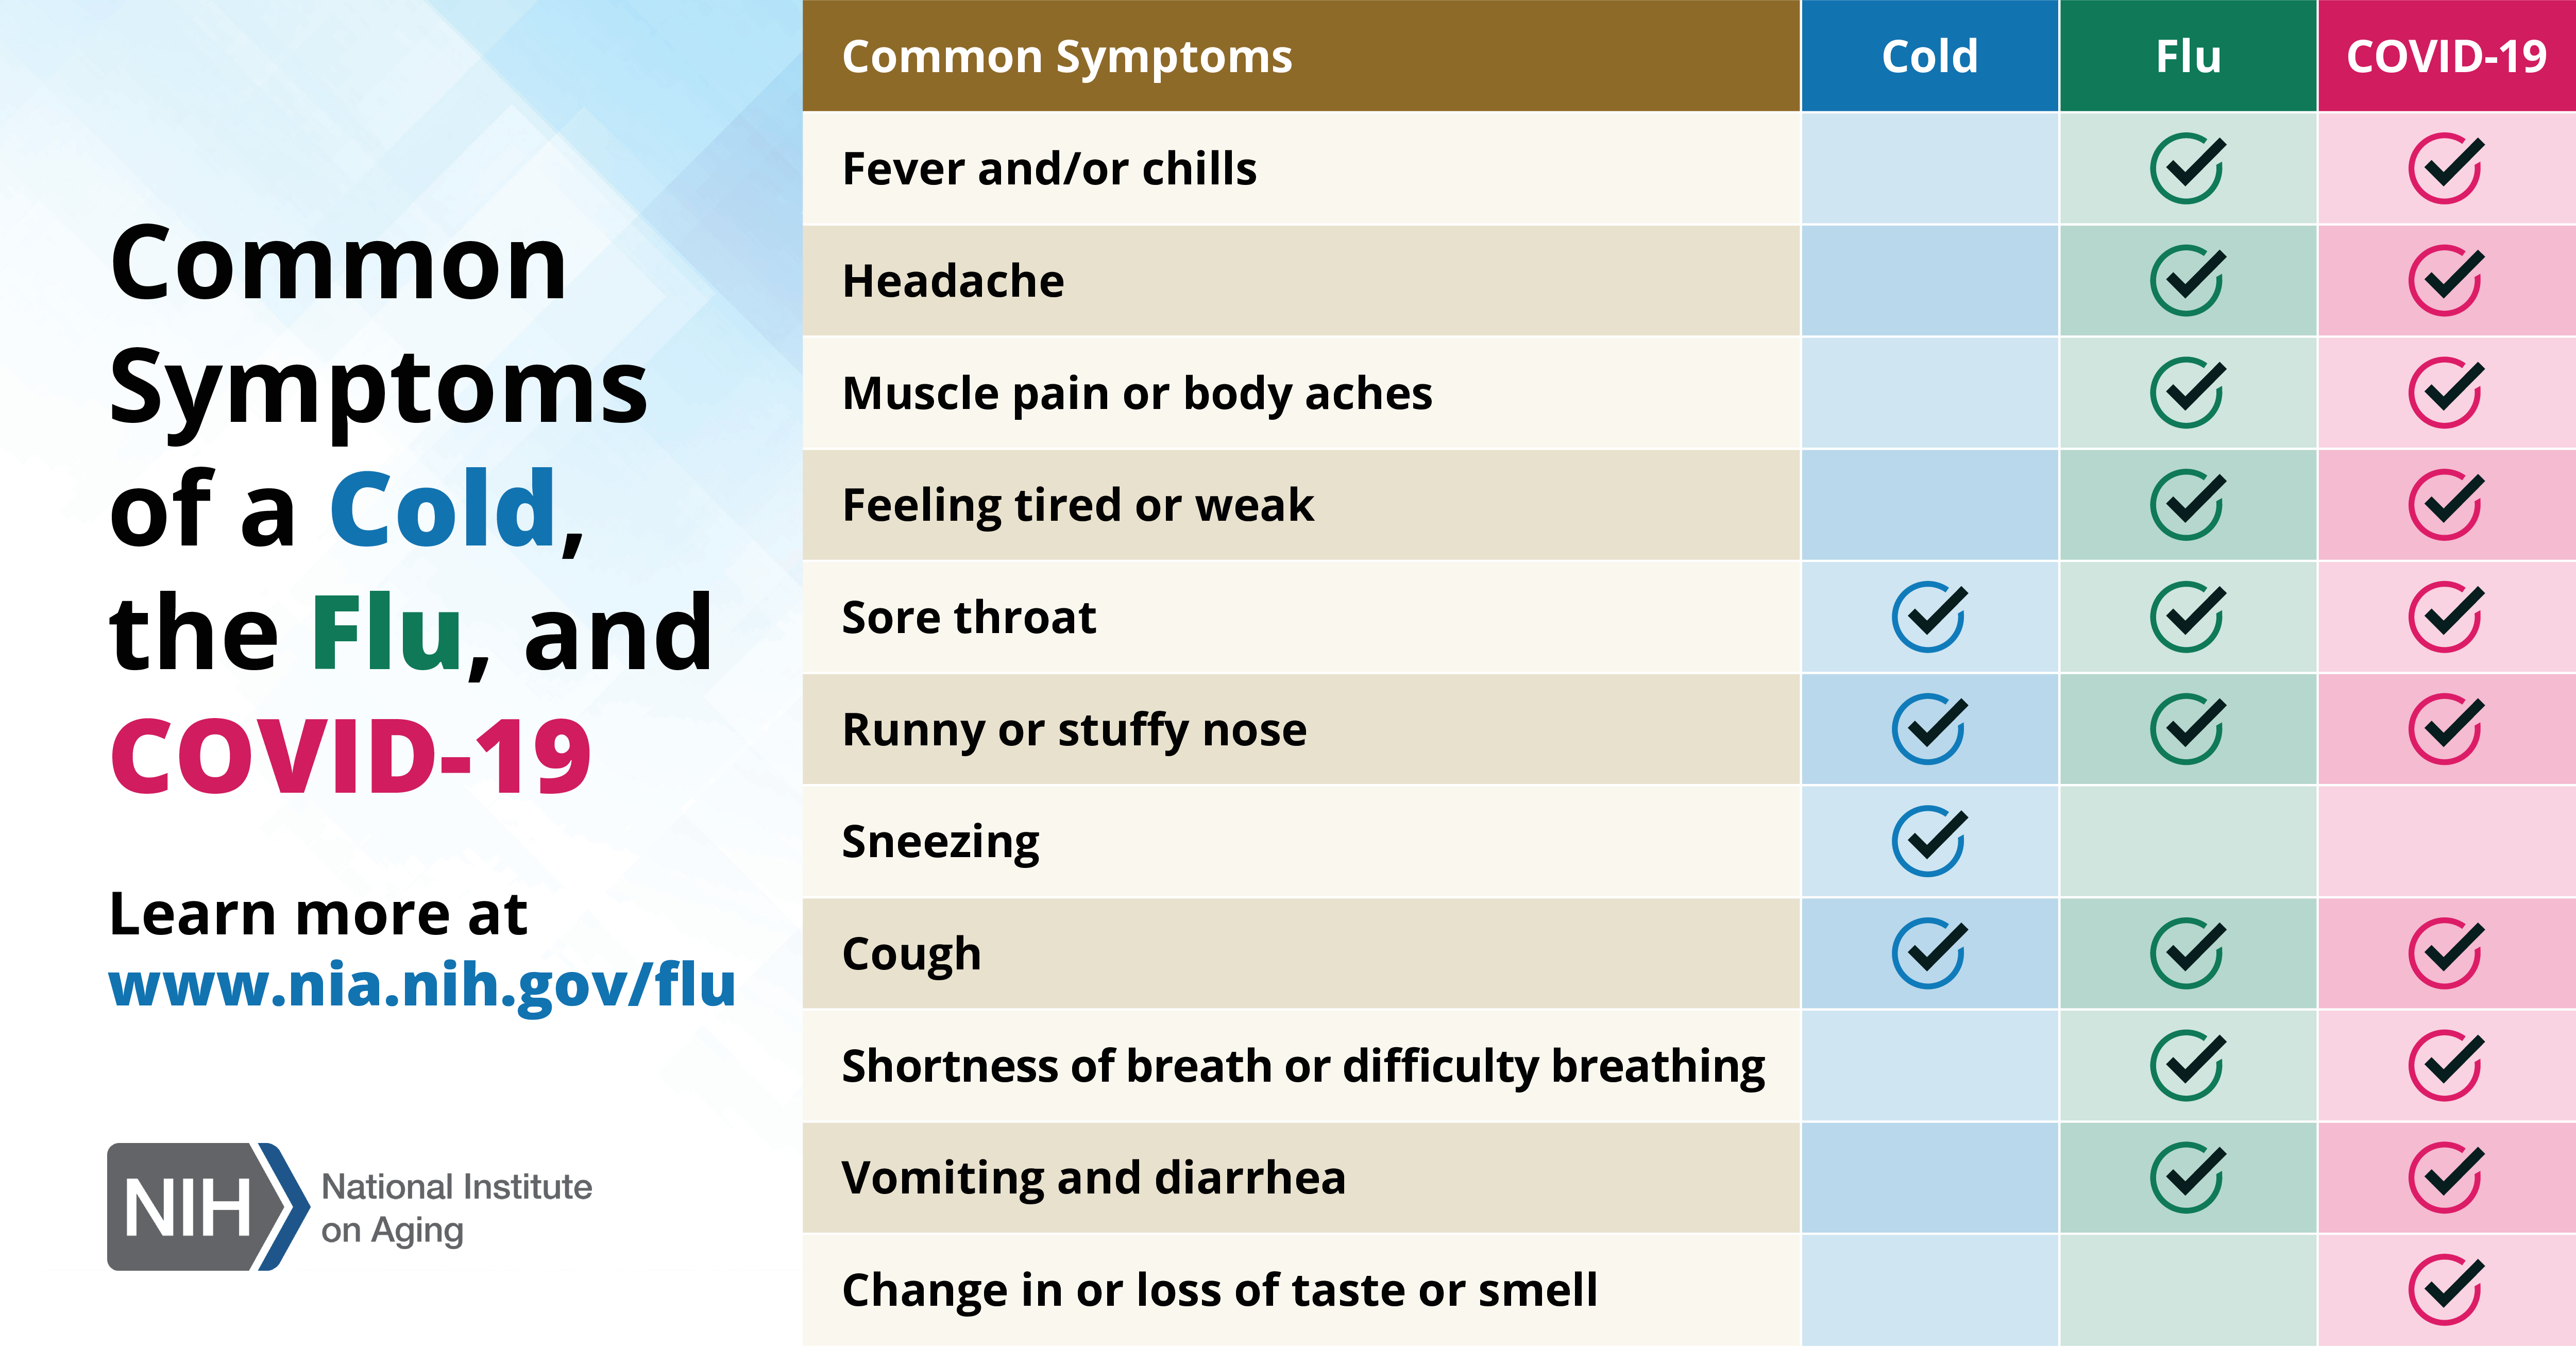 A chart of four columns and 11 rows that describes the common symptoms of a cold, the flu, and COVID-19